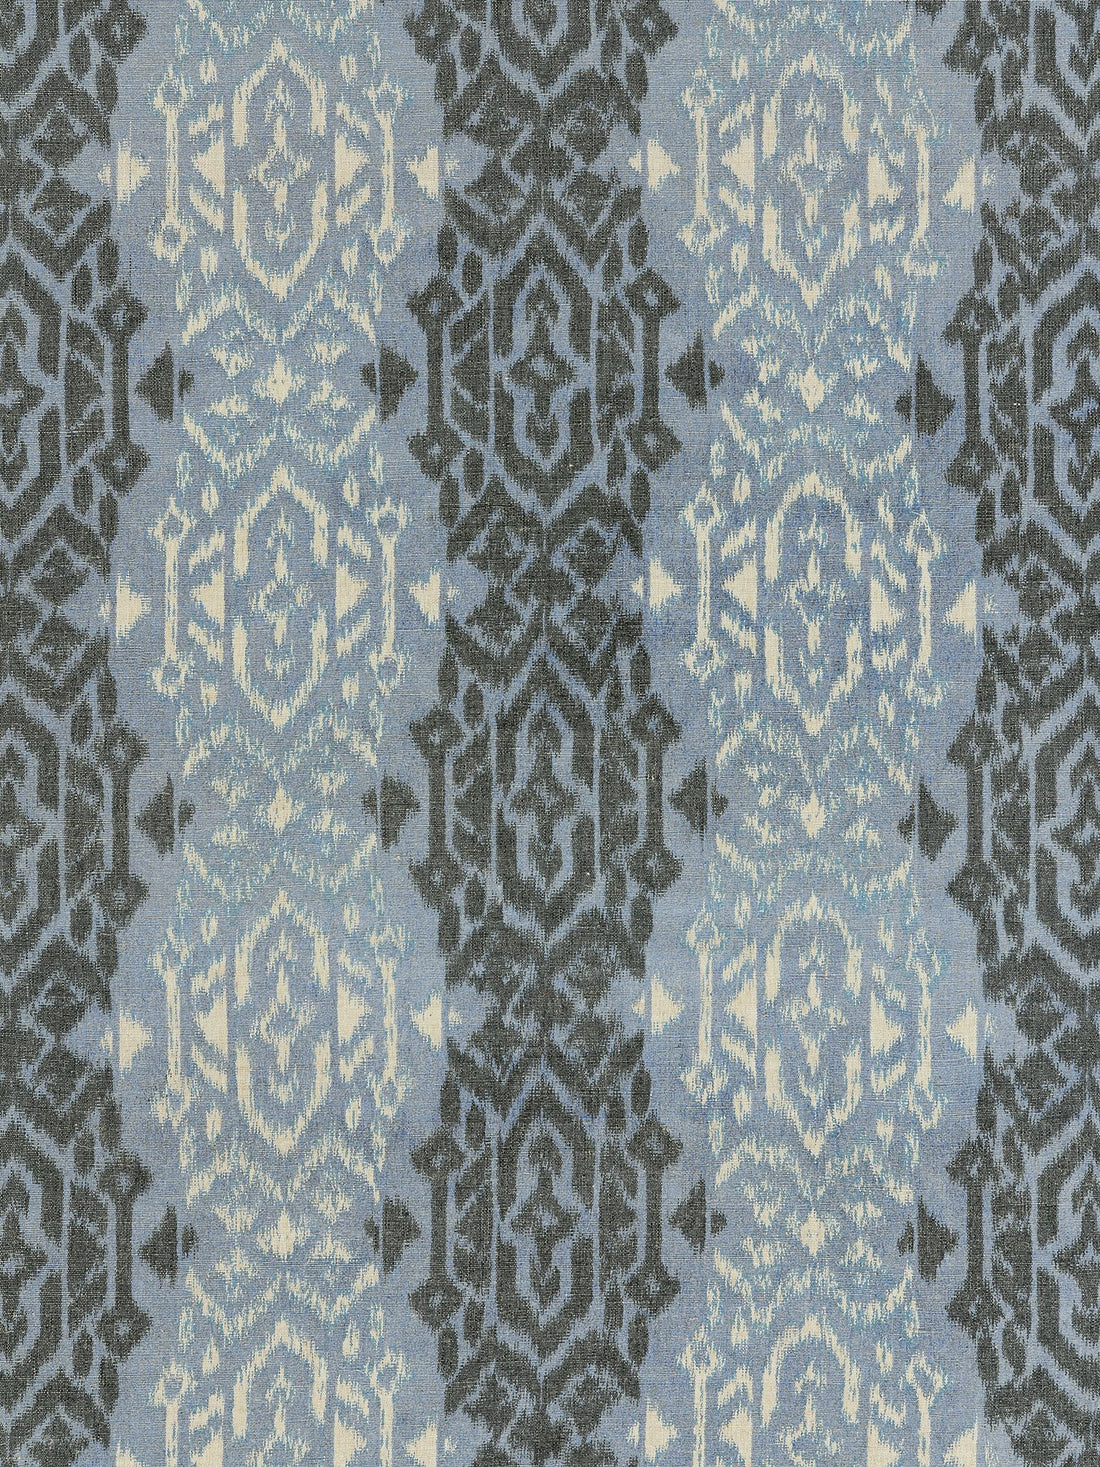 Sumatra Ikat Weave fabric in indigo color - pattern number SC 000327167 - by Scalamandre in the Scalamandre Fabrics Book 1 collection